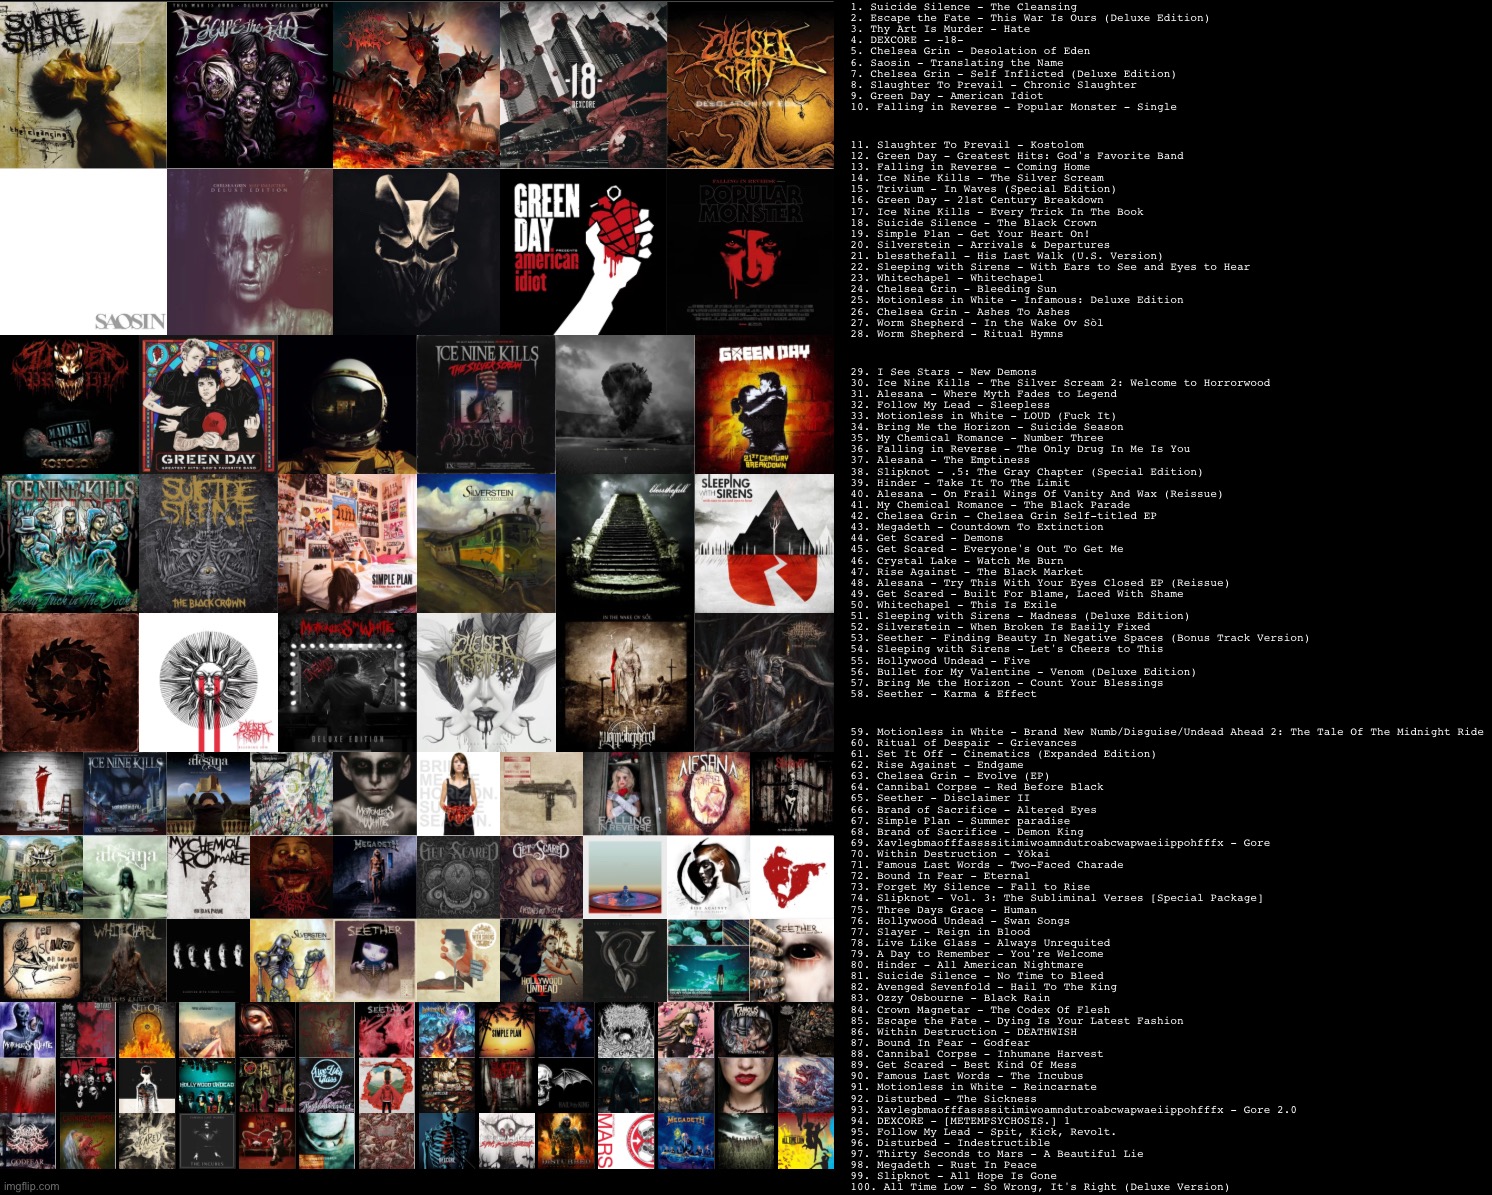 Trust me these bands make good music | image tagged in metal | made w/ Imgflip meme maker